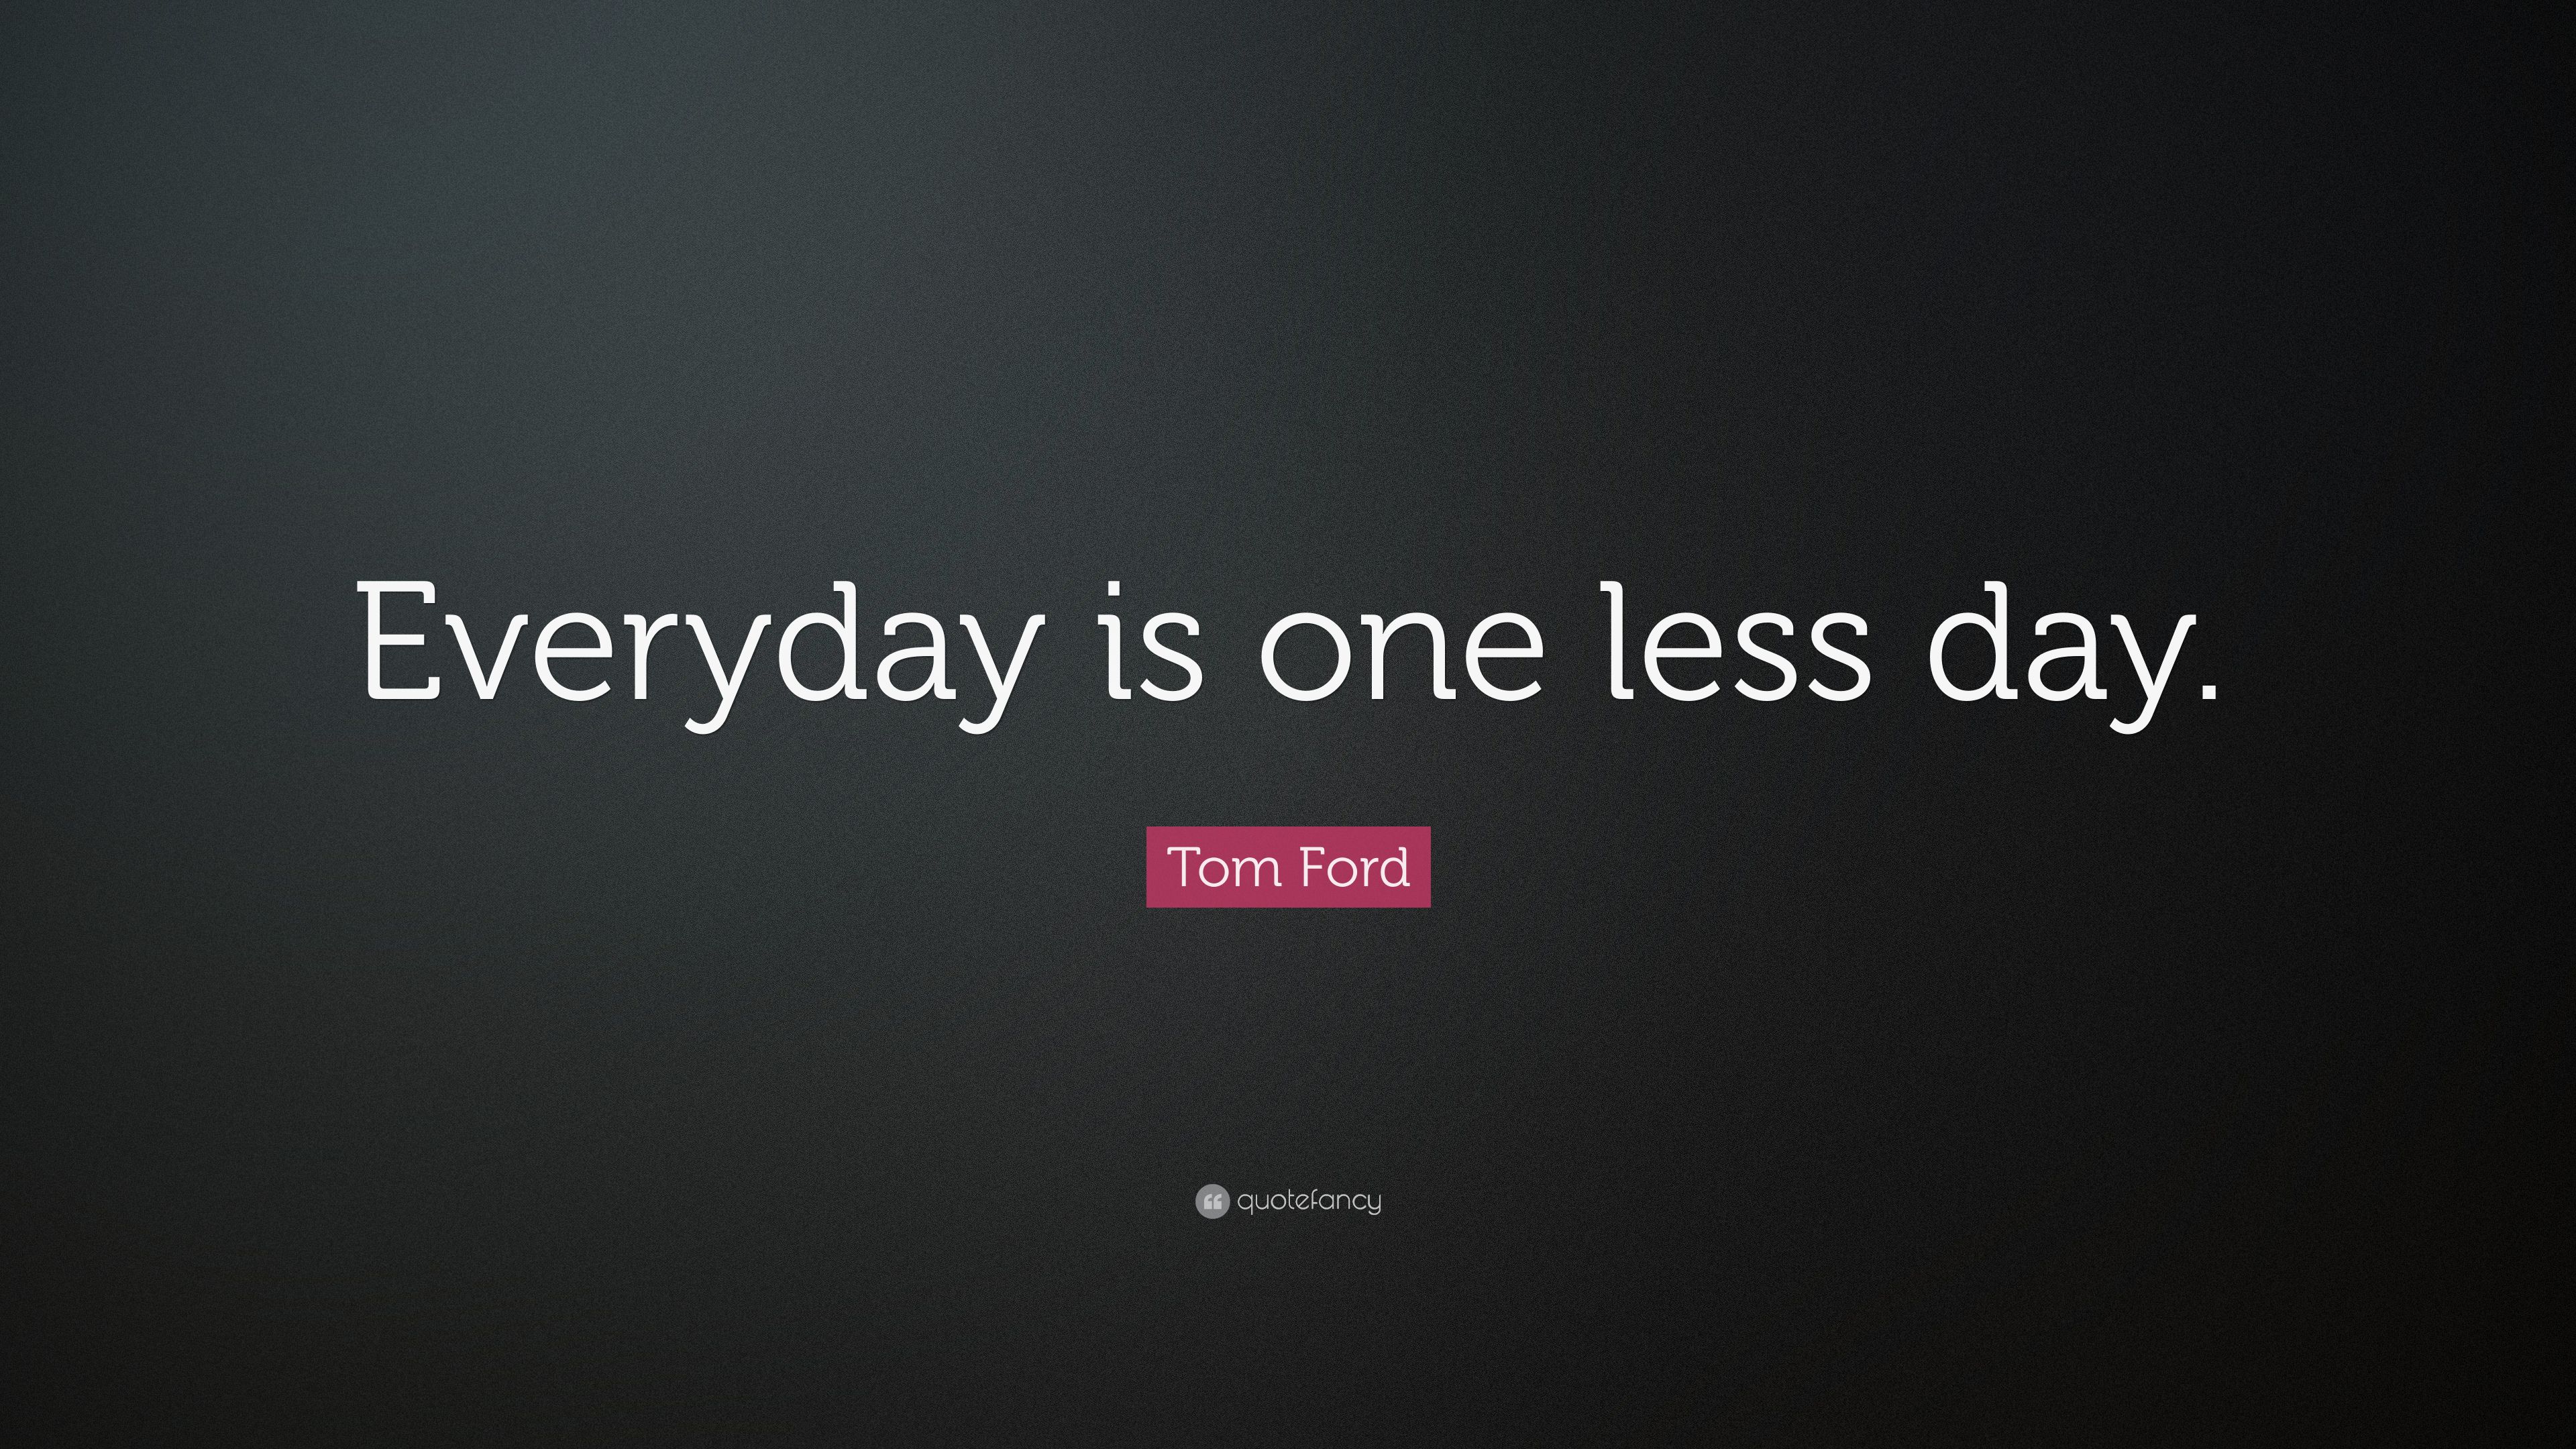 Tom Ford Quote: “Everyday is one less day.” (12 wallpaper)